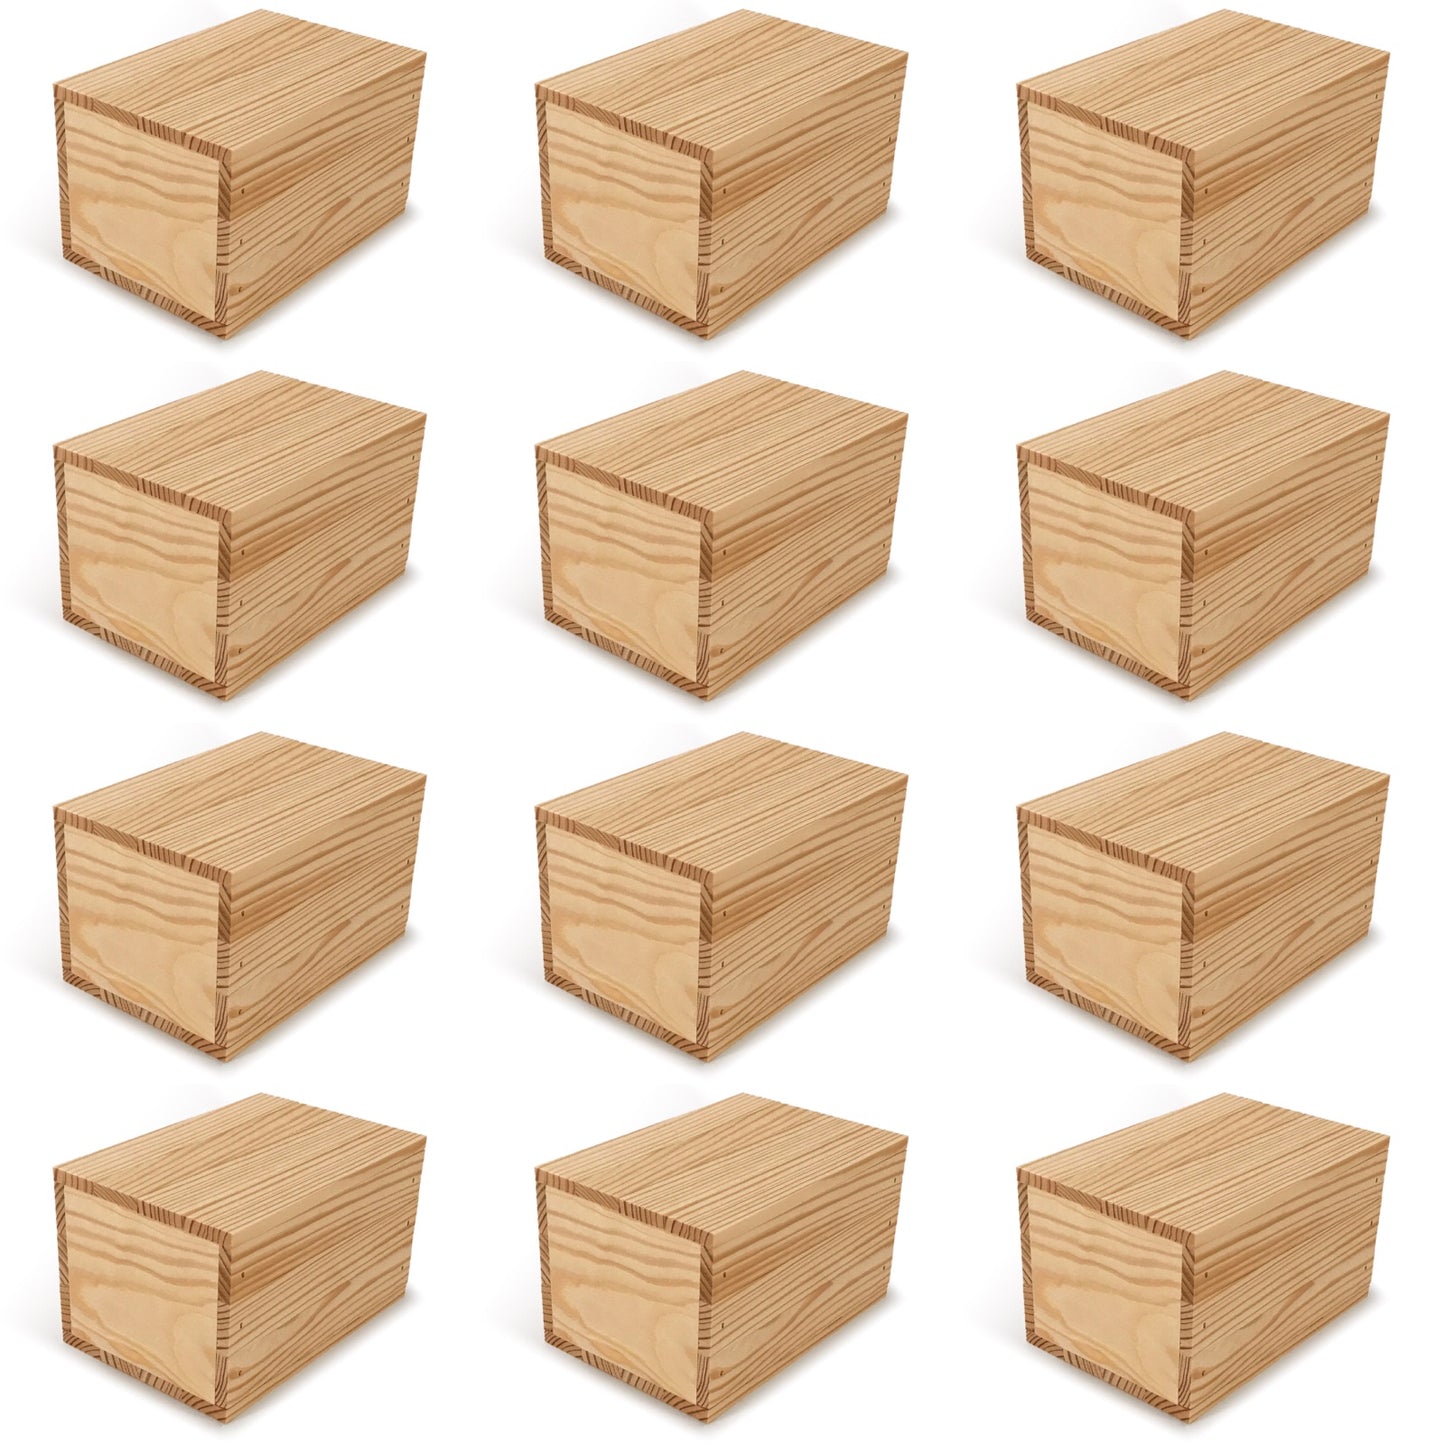 12 Small wooden crates with lid 7x5x4.25